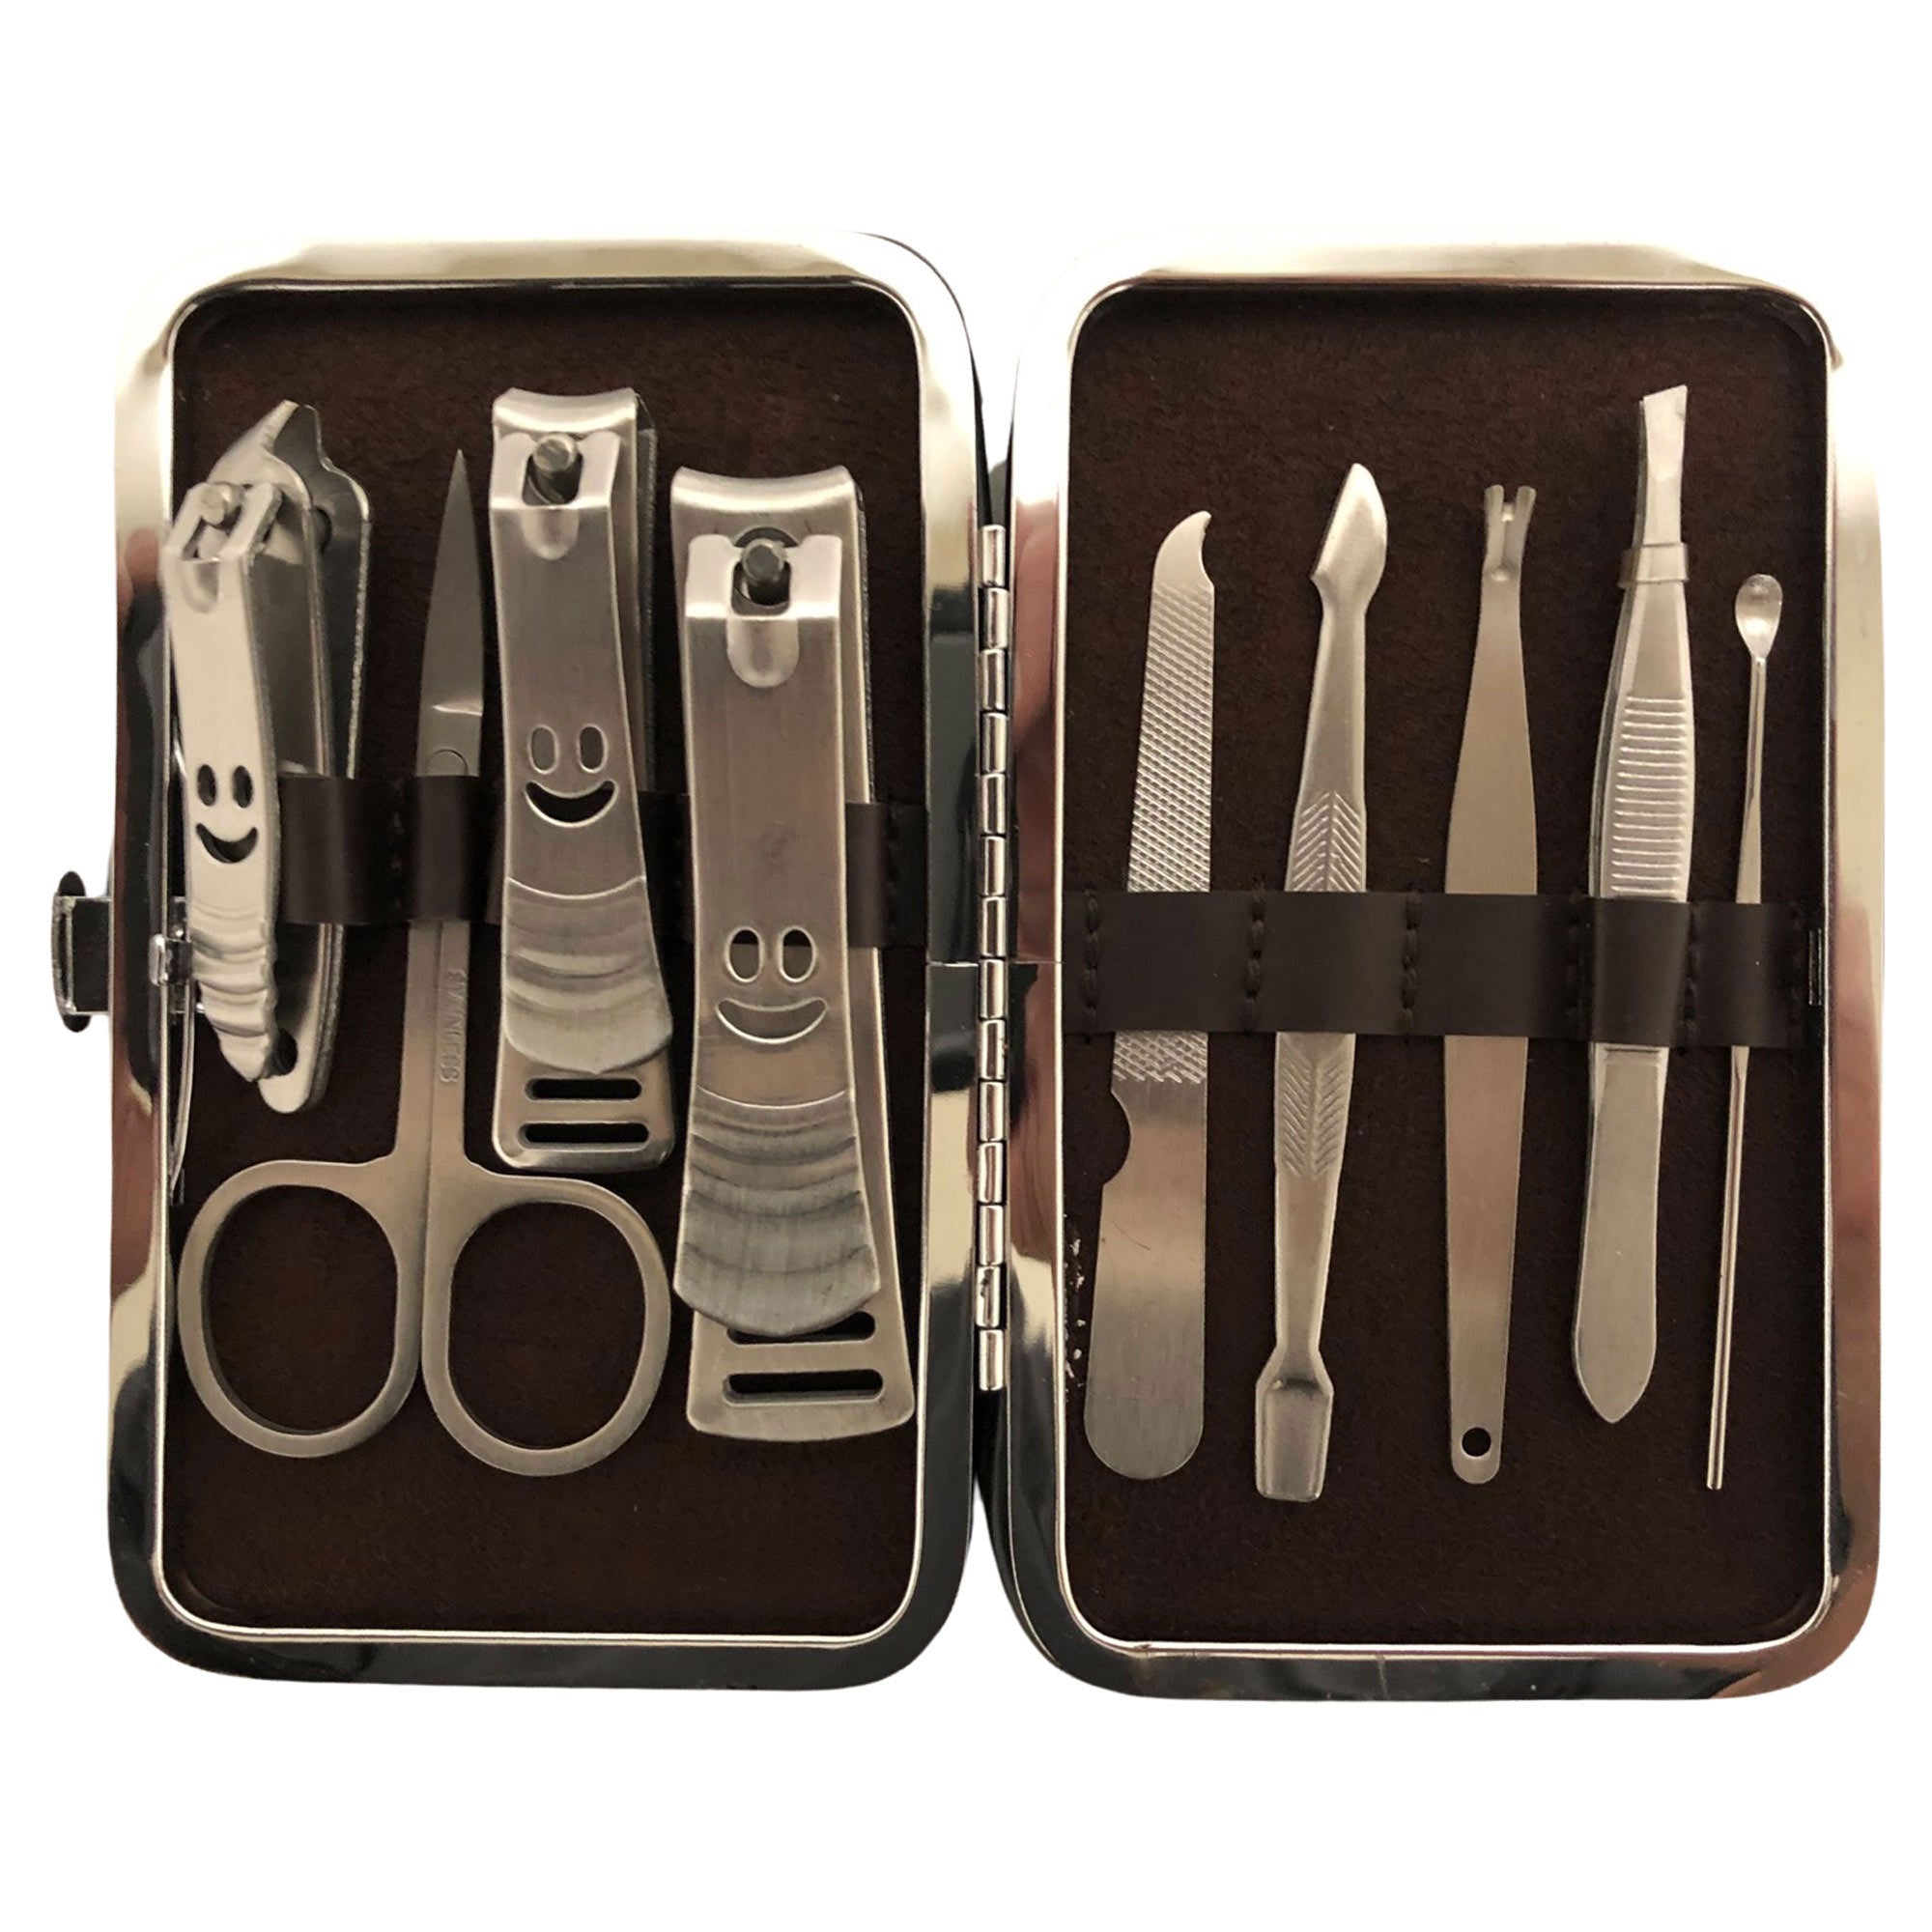 CLEARANCE MANICURE SET IN LT BROWN CASE (CASE OF 24 - $2.50 / PIECE)  Wholesale 9 Piece Stainless Steel Manicure Set in Light Brown SKU: 9699-9019-SMT-LT BROWN-24